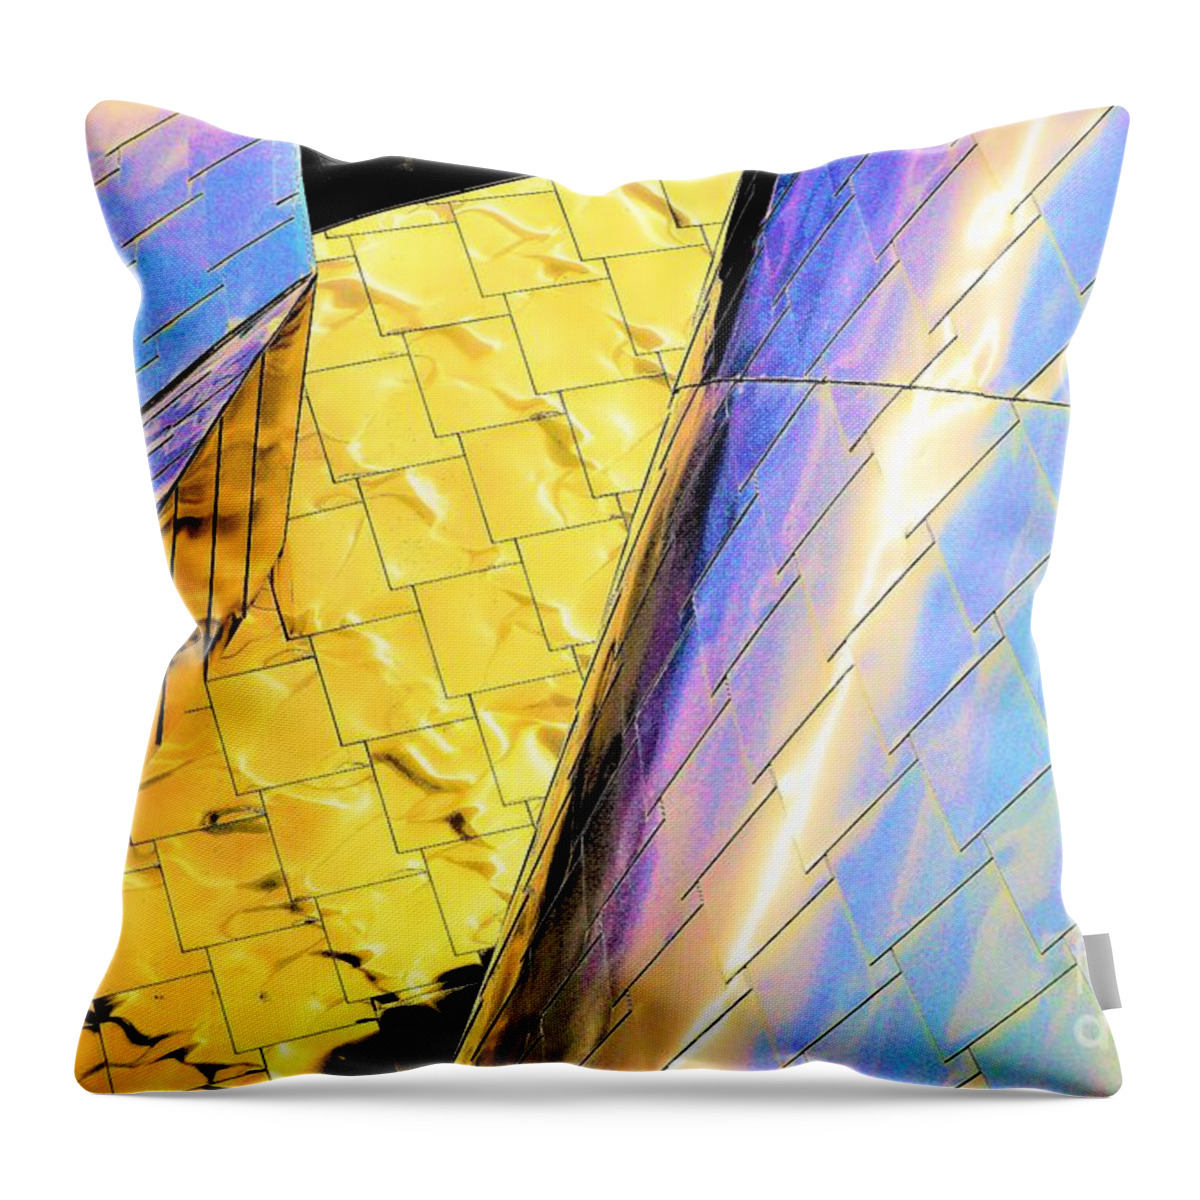 Reflections Peter B. Lewis Building Throw Pillow featuring the photograph Reflections on Peter B. Lewis Building, Cleveland2 by Merle Grenz